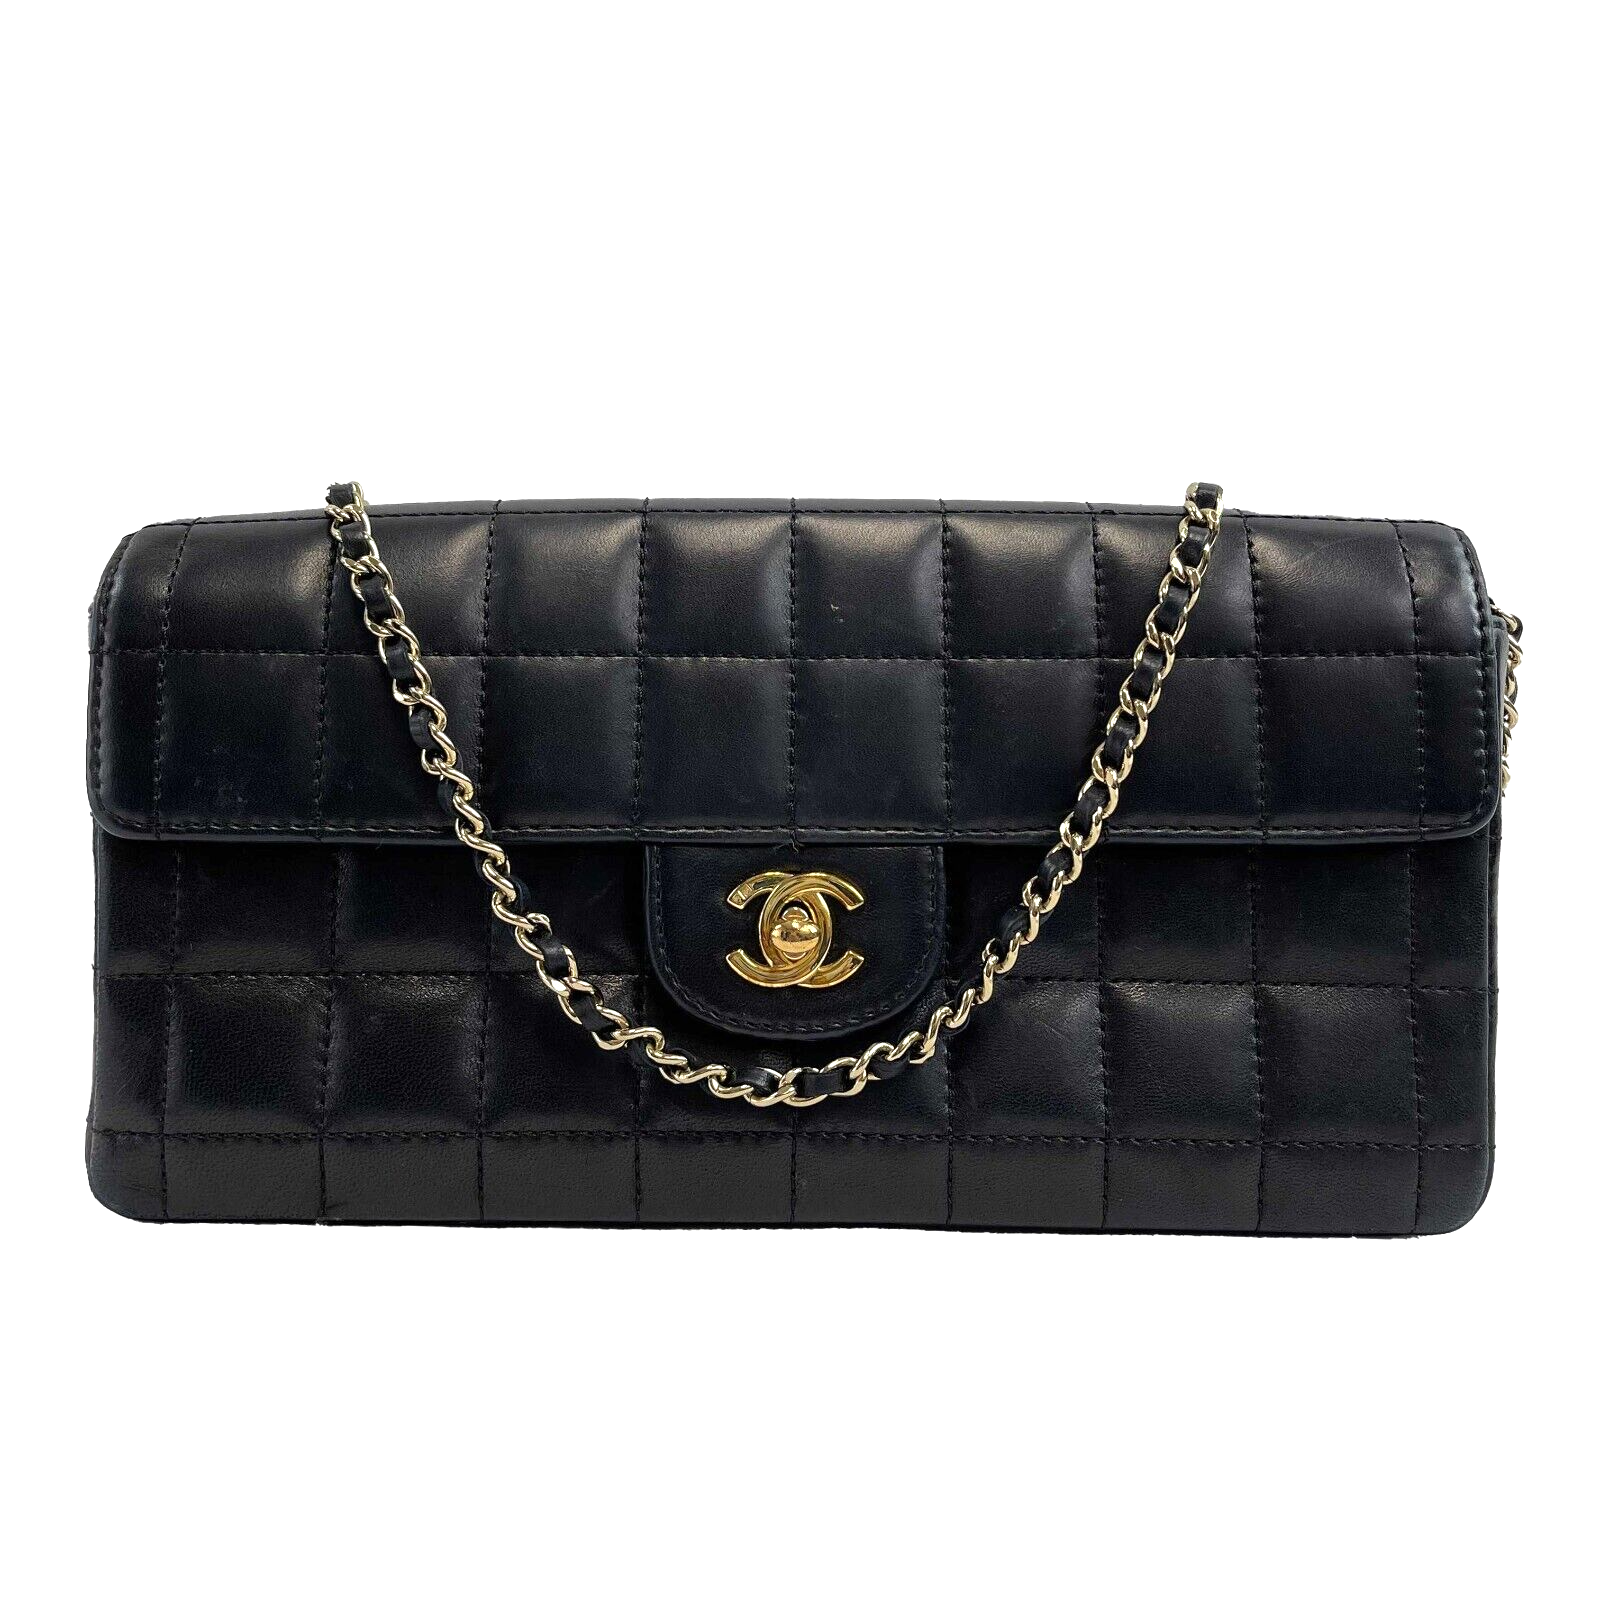 AUTH Black CHANEL Sheepskin Leather and Wool Knit MED Flap Bag - retail  $4500